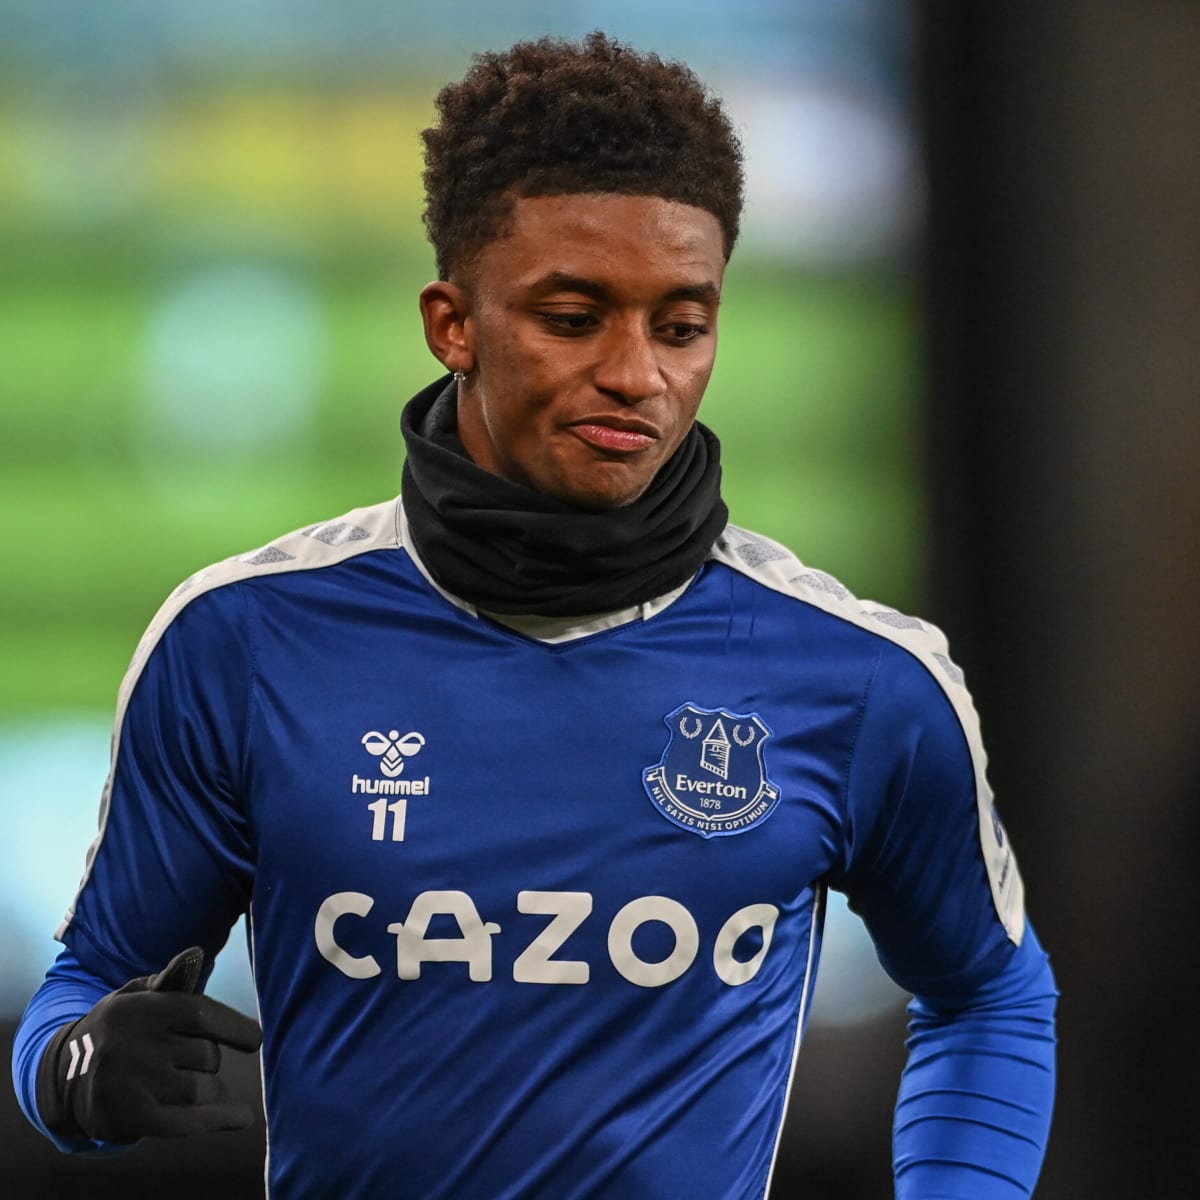 Watch: Demarai Gray Rocket Wins Game For Everton Against Arsenal A Goal! Illustrated Liverpool FC News, Analysis, and More